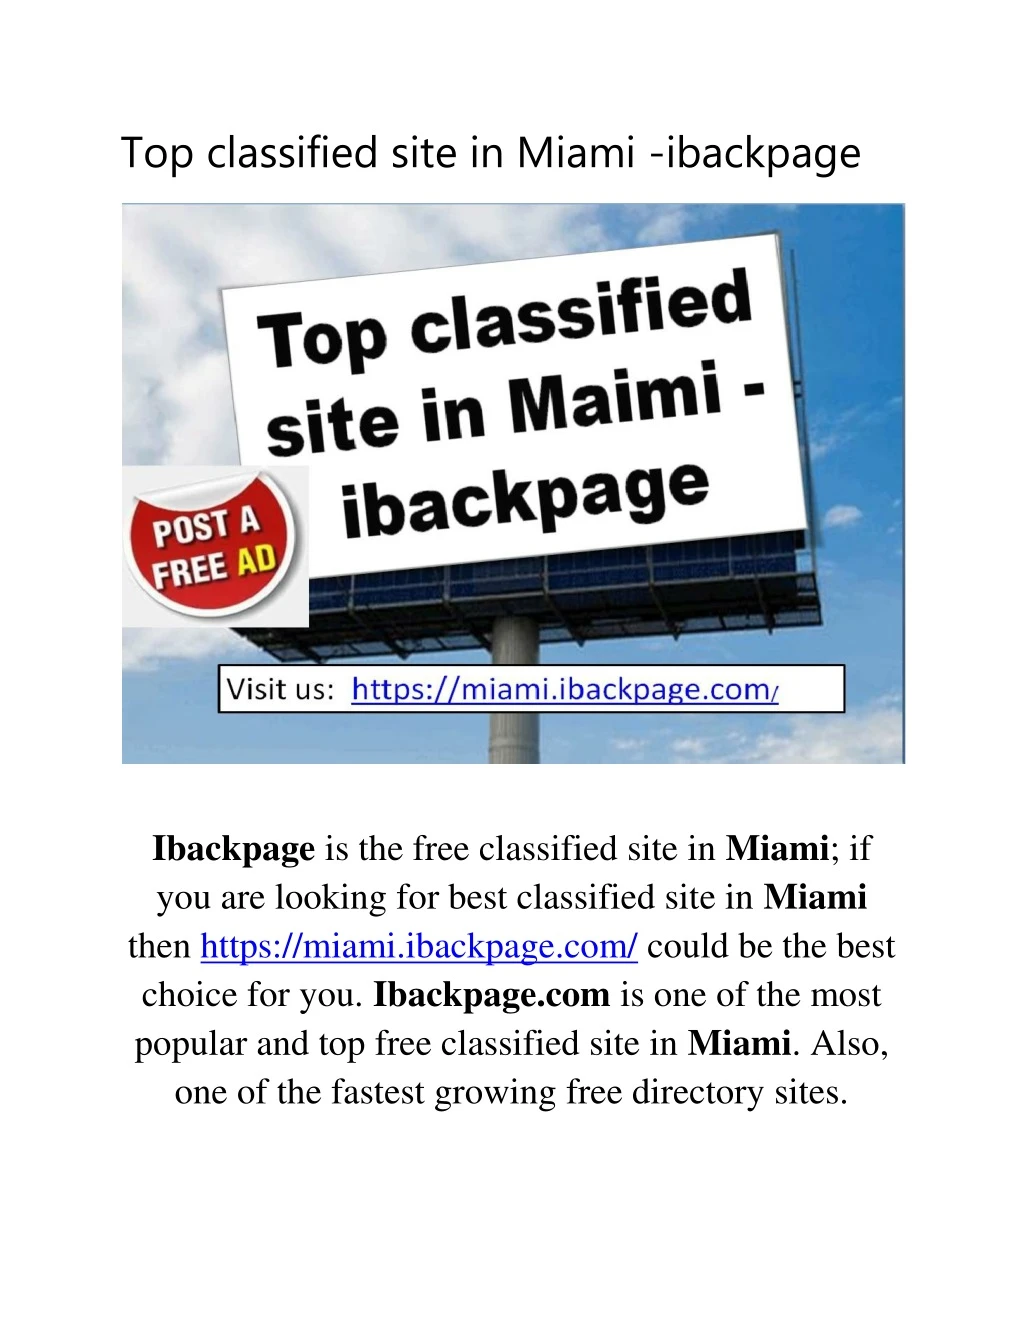 top classified site in miami ibackpage